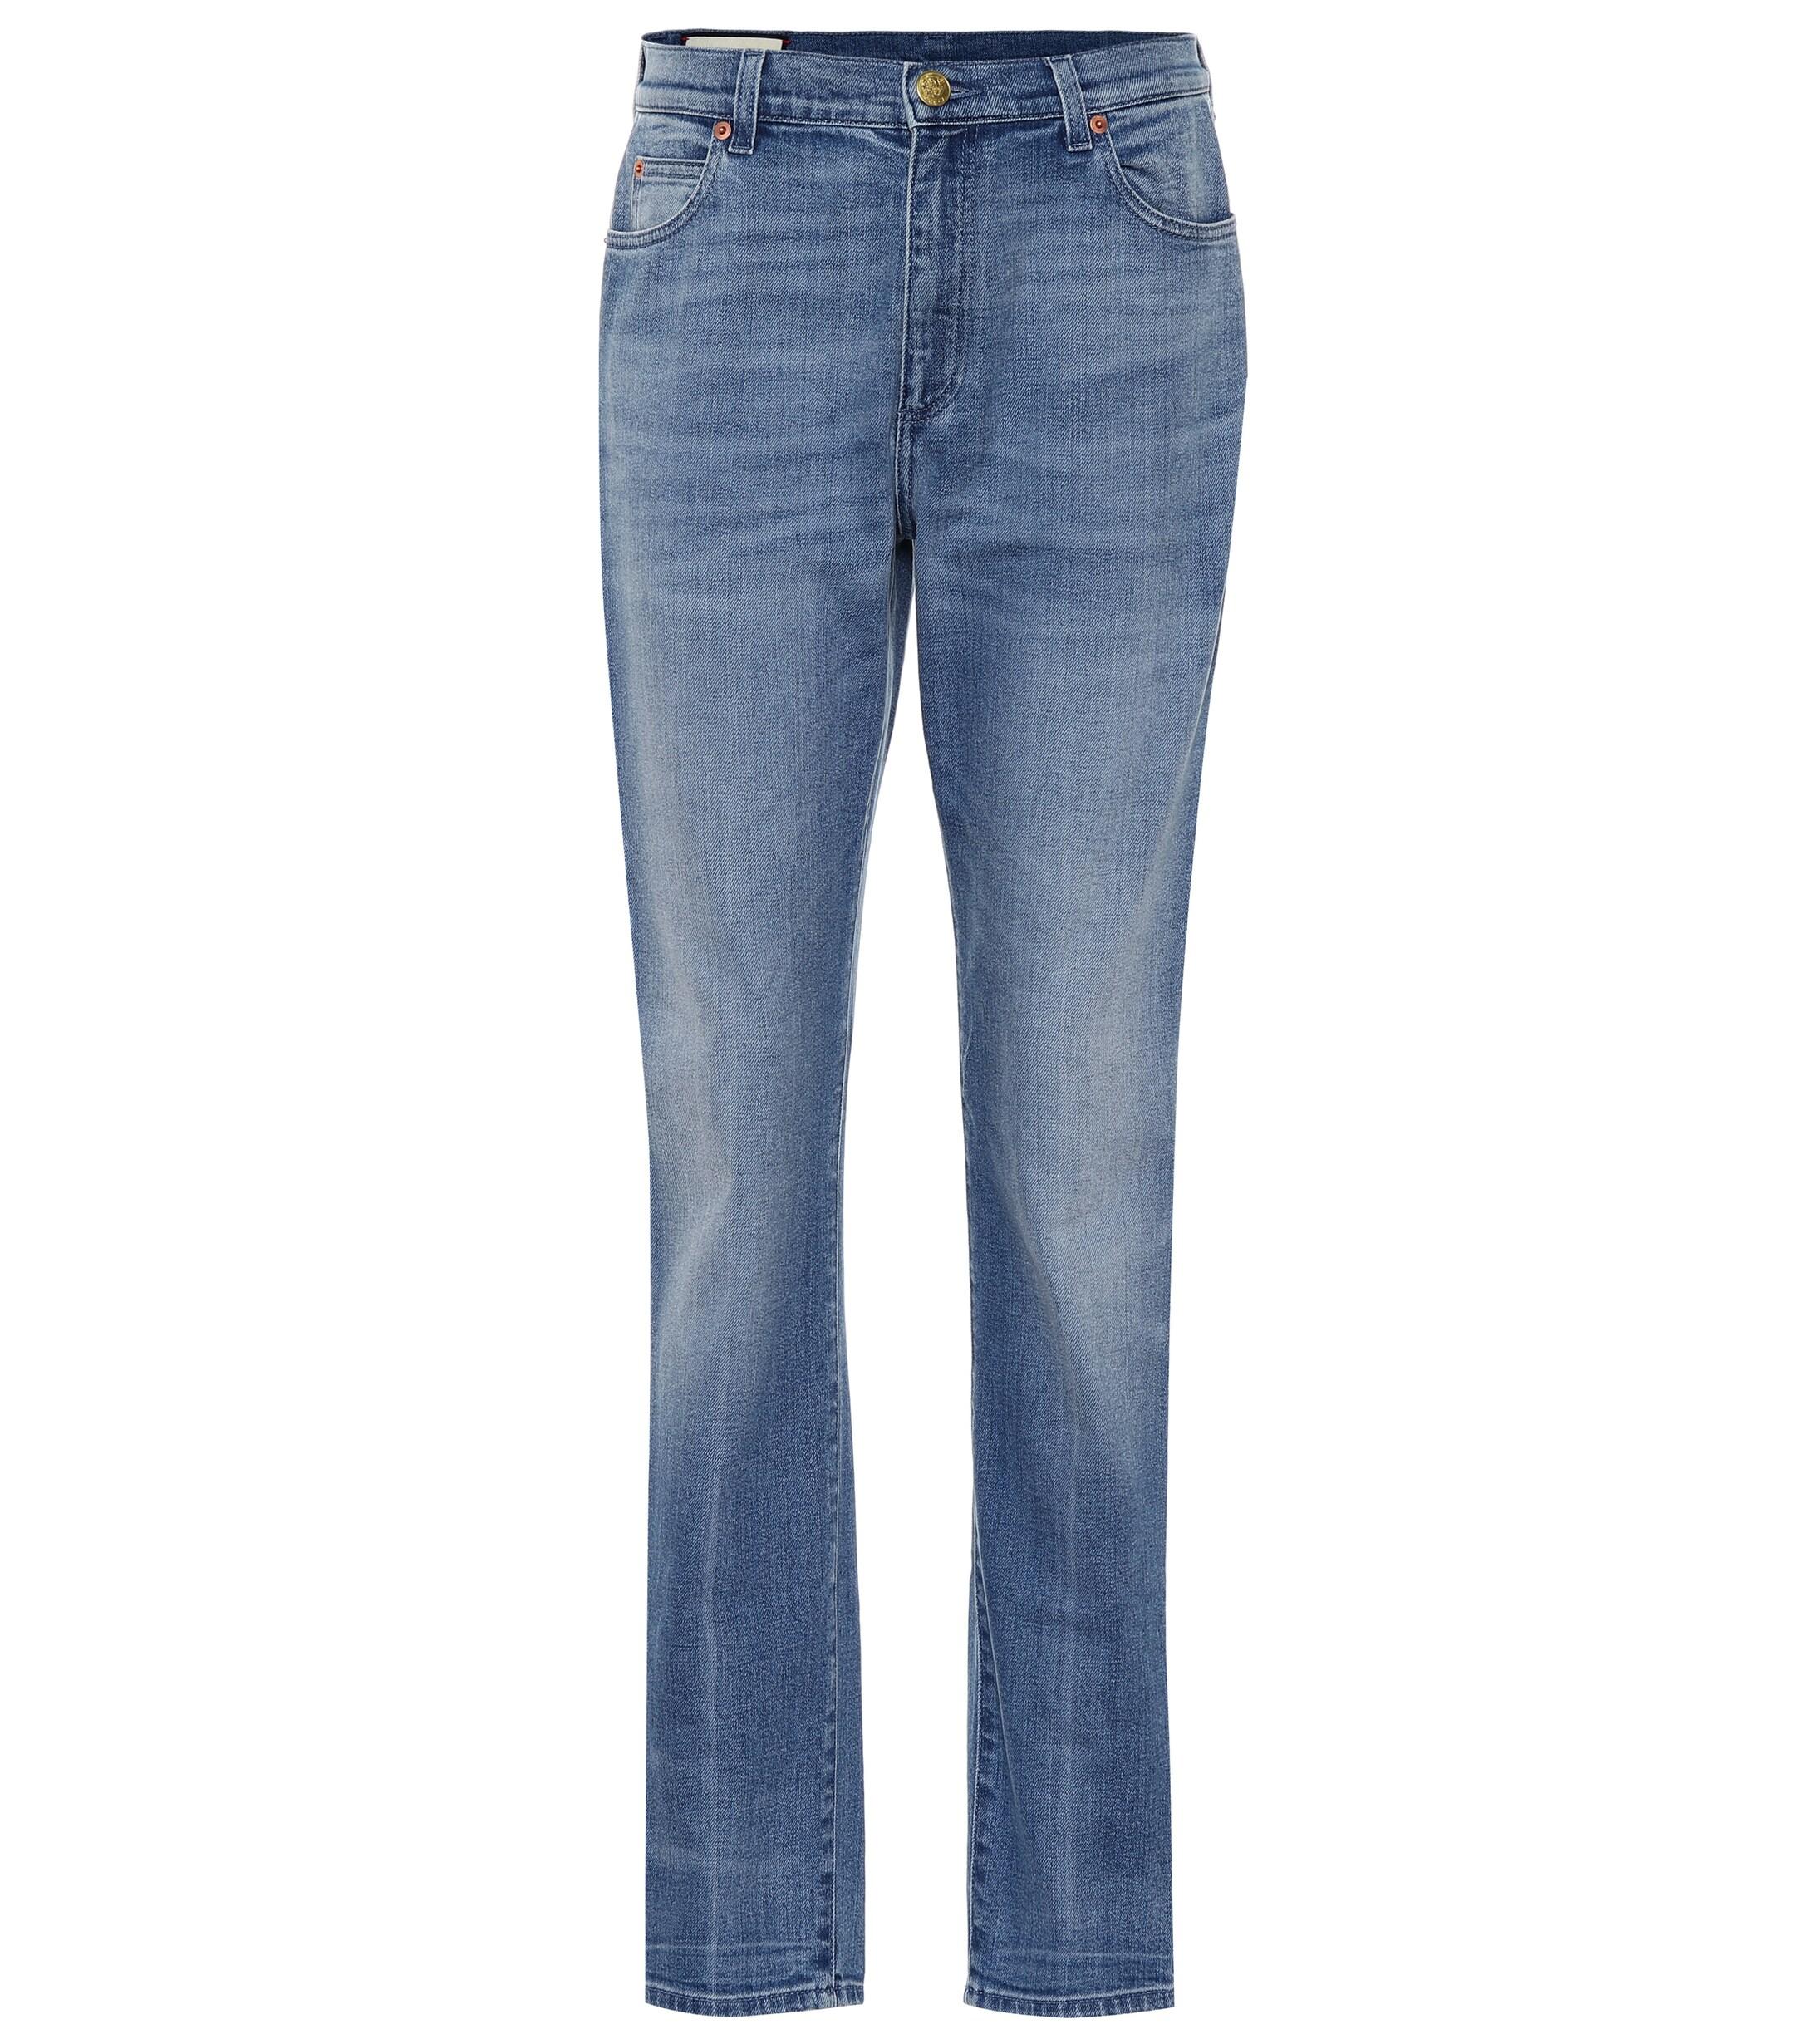 Gucci High-waisted Skinny Jeans in Blue - Lyst